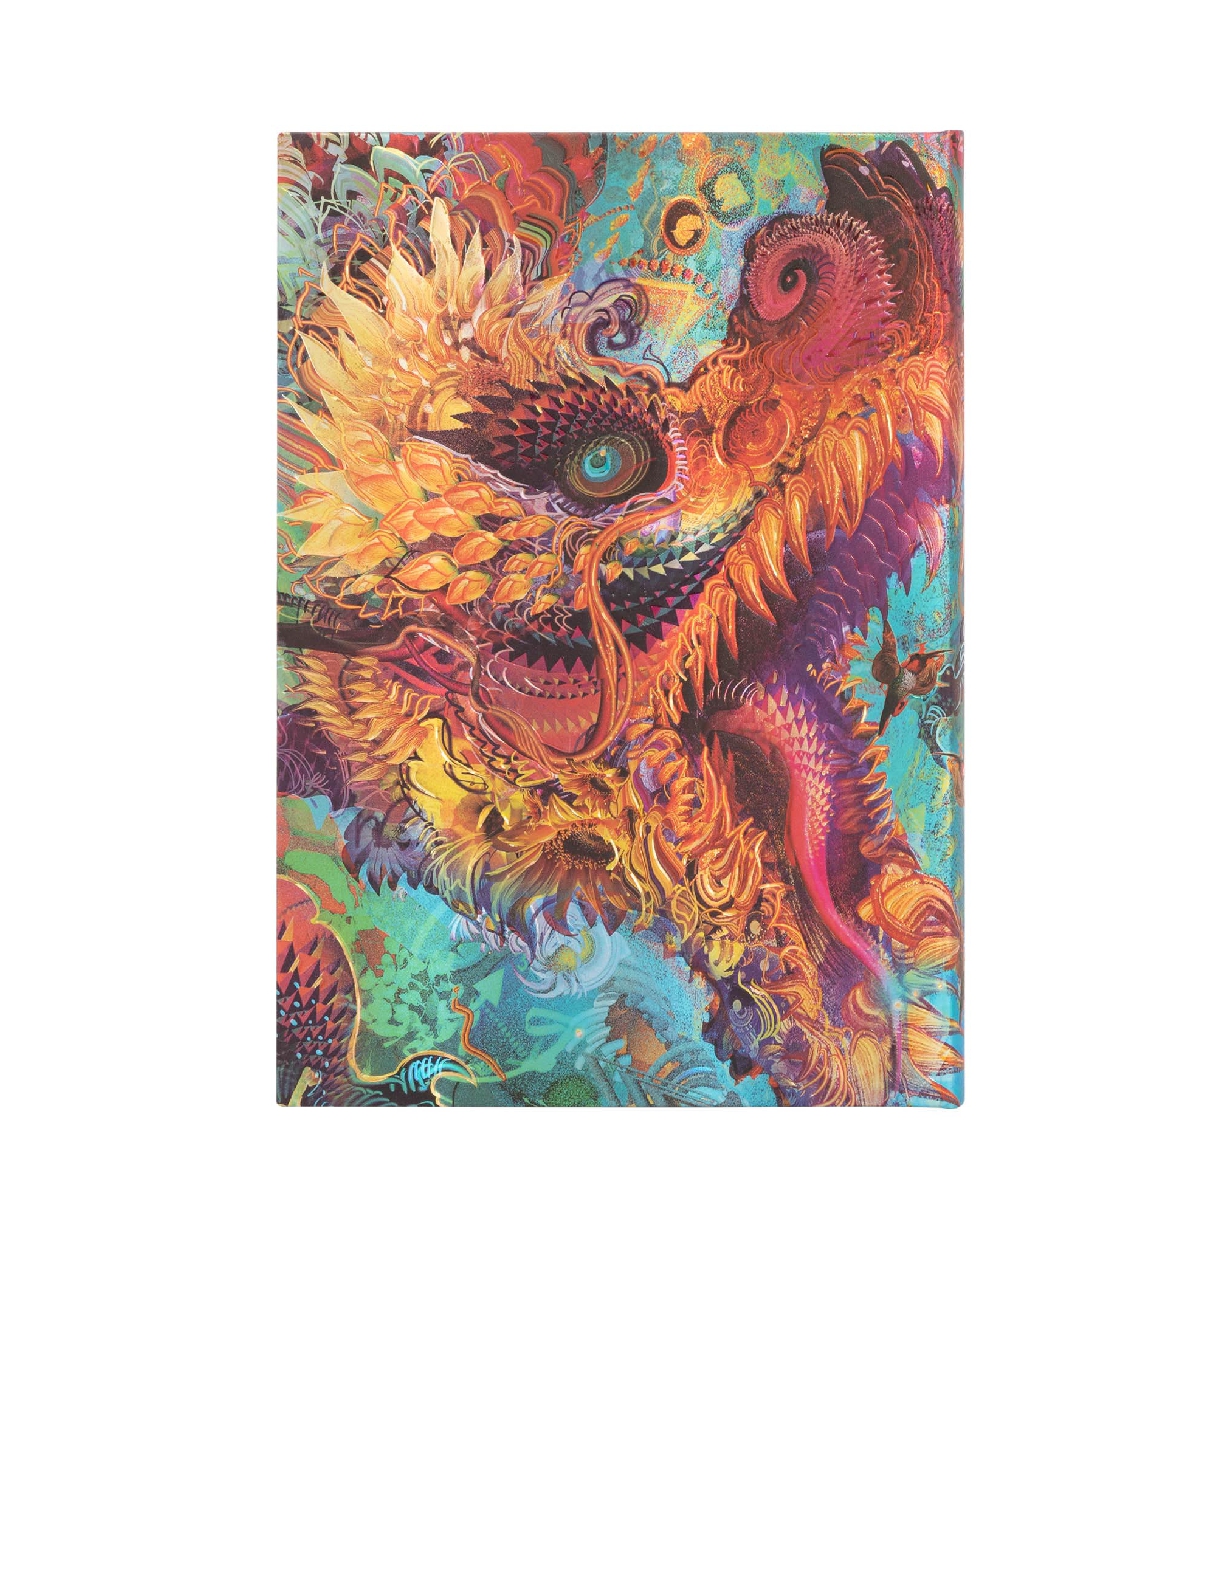 Humming Dragon, Android Jones Collection, Hardcover, Midi, Lined, Elastic Band Closure, 144 Pg, 120 GSM